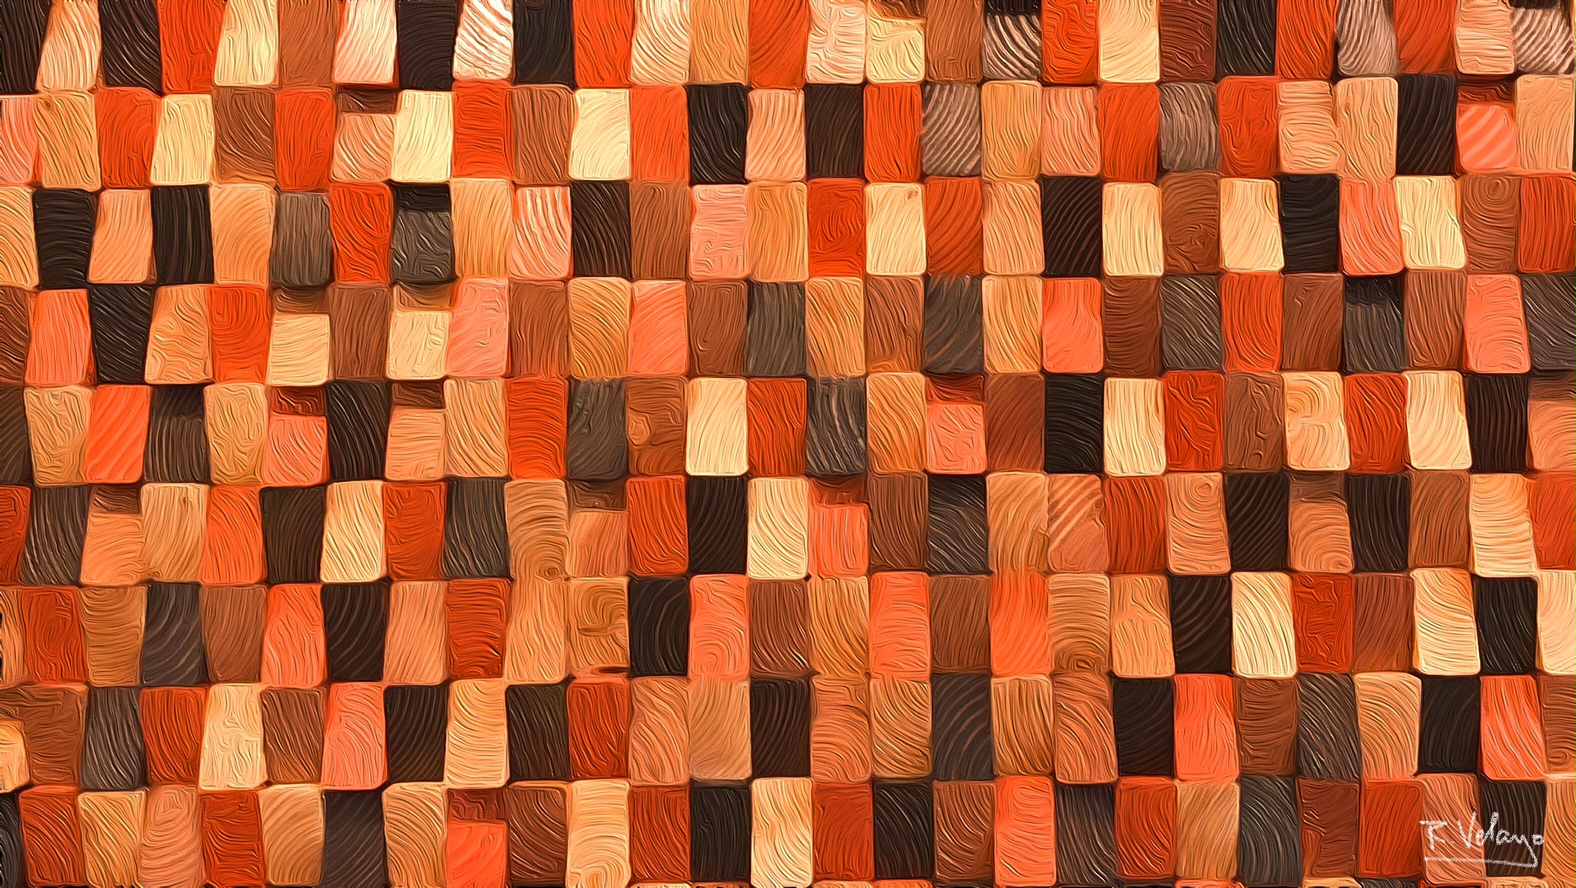 "GRID OF WOODEN TILES IN EARTH TONES" [Created: 6/19/2021]